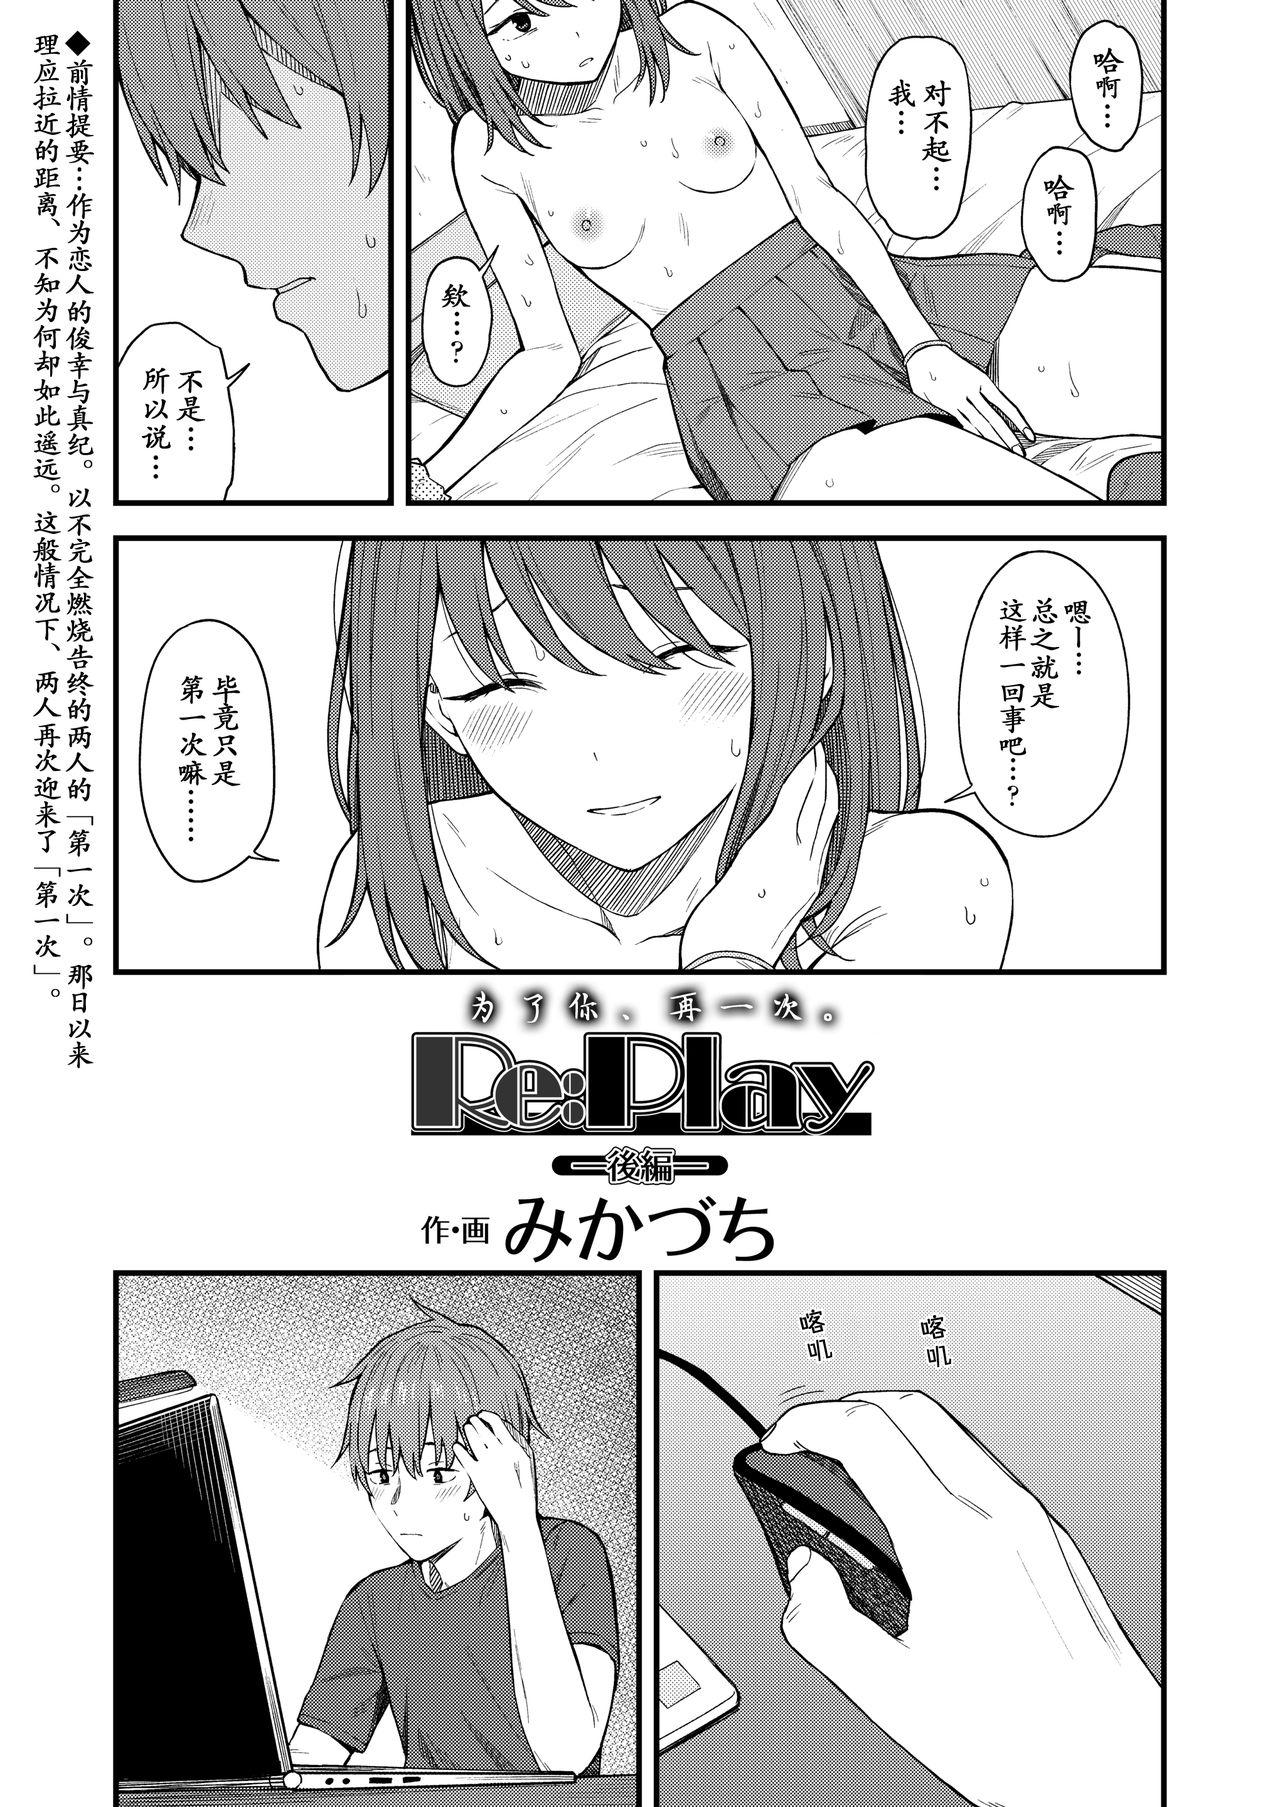 She Re:Play Kouhen Office Sex - Picture 1